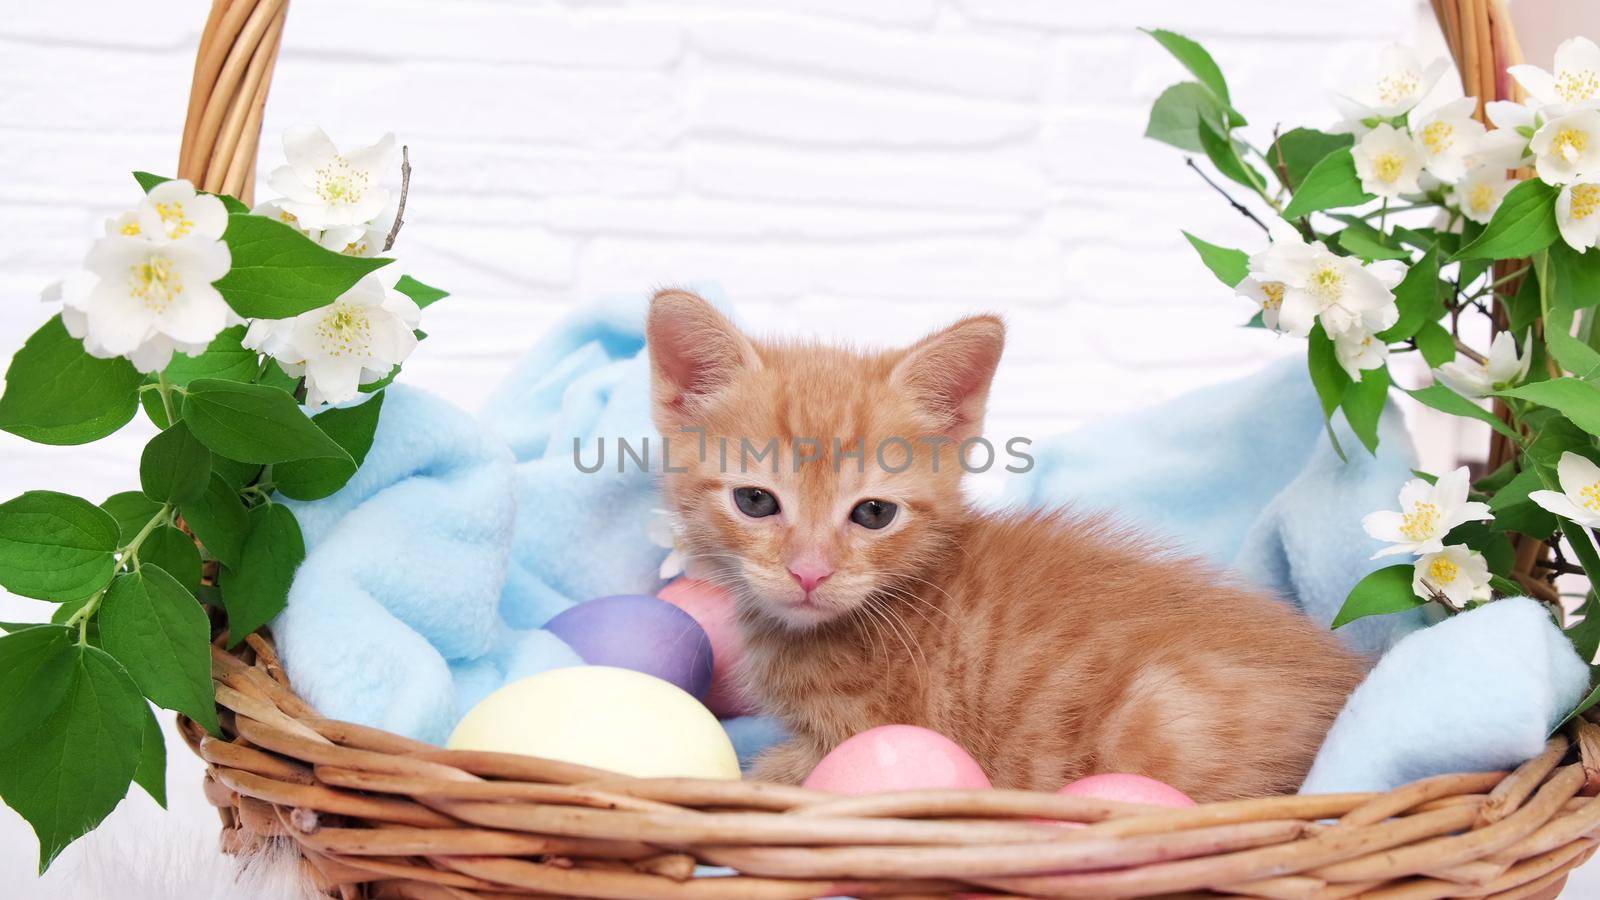 A small red tabby kitten lies comfortably in a blue blanket and looks around with easters eggs. Concept of taking care of pets, spring holidays, Easter.